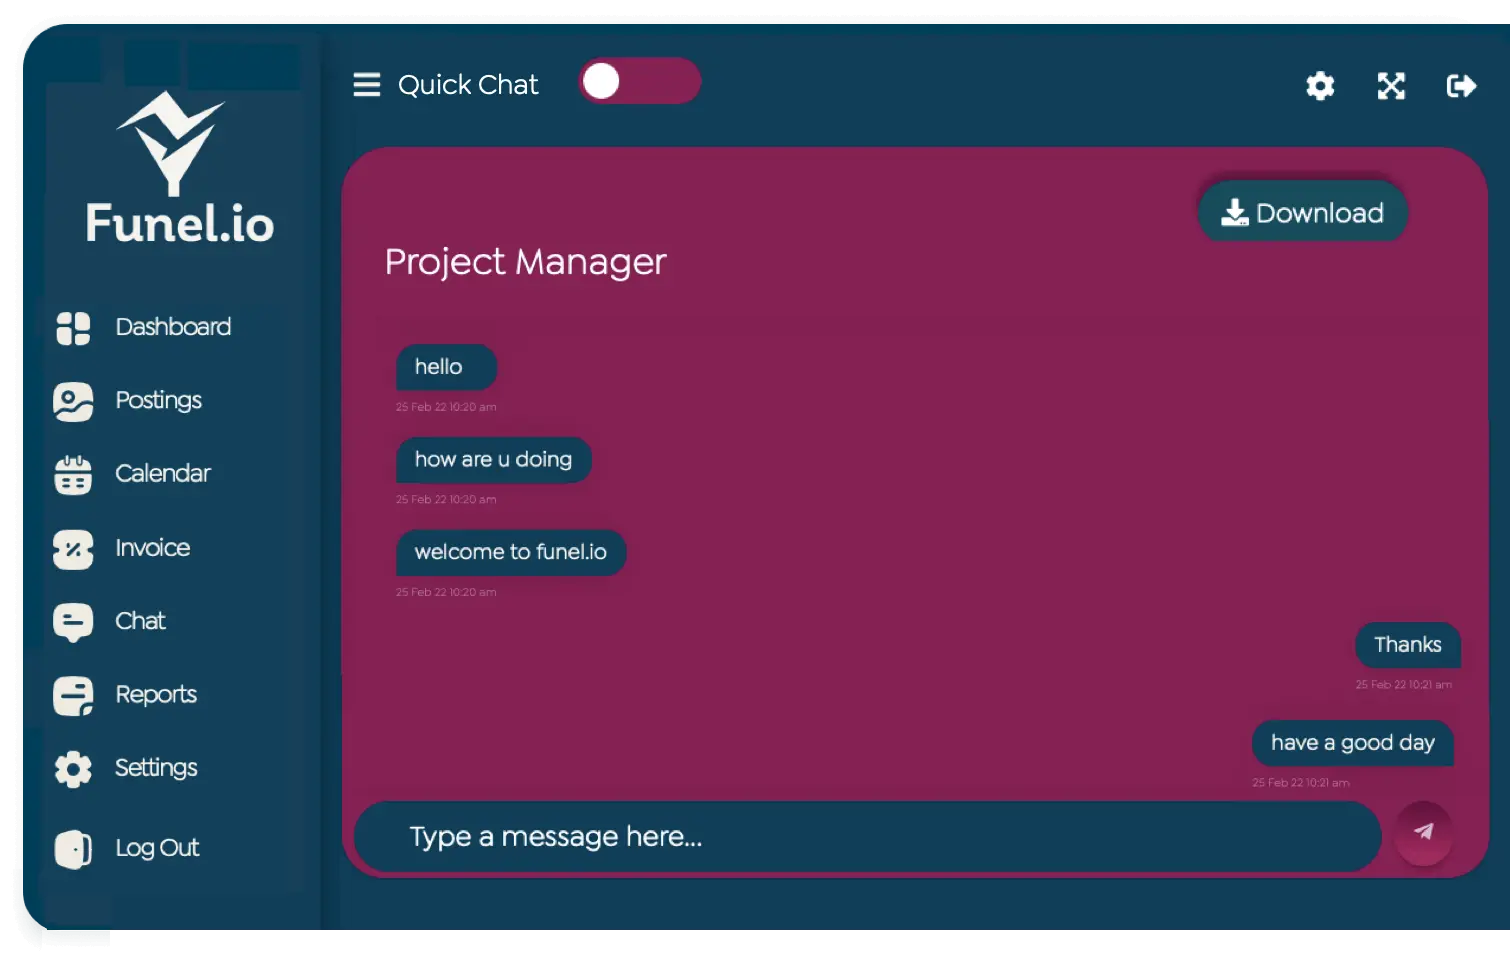 how to download invoices and chat with project manager